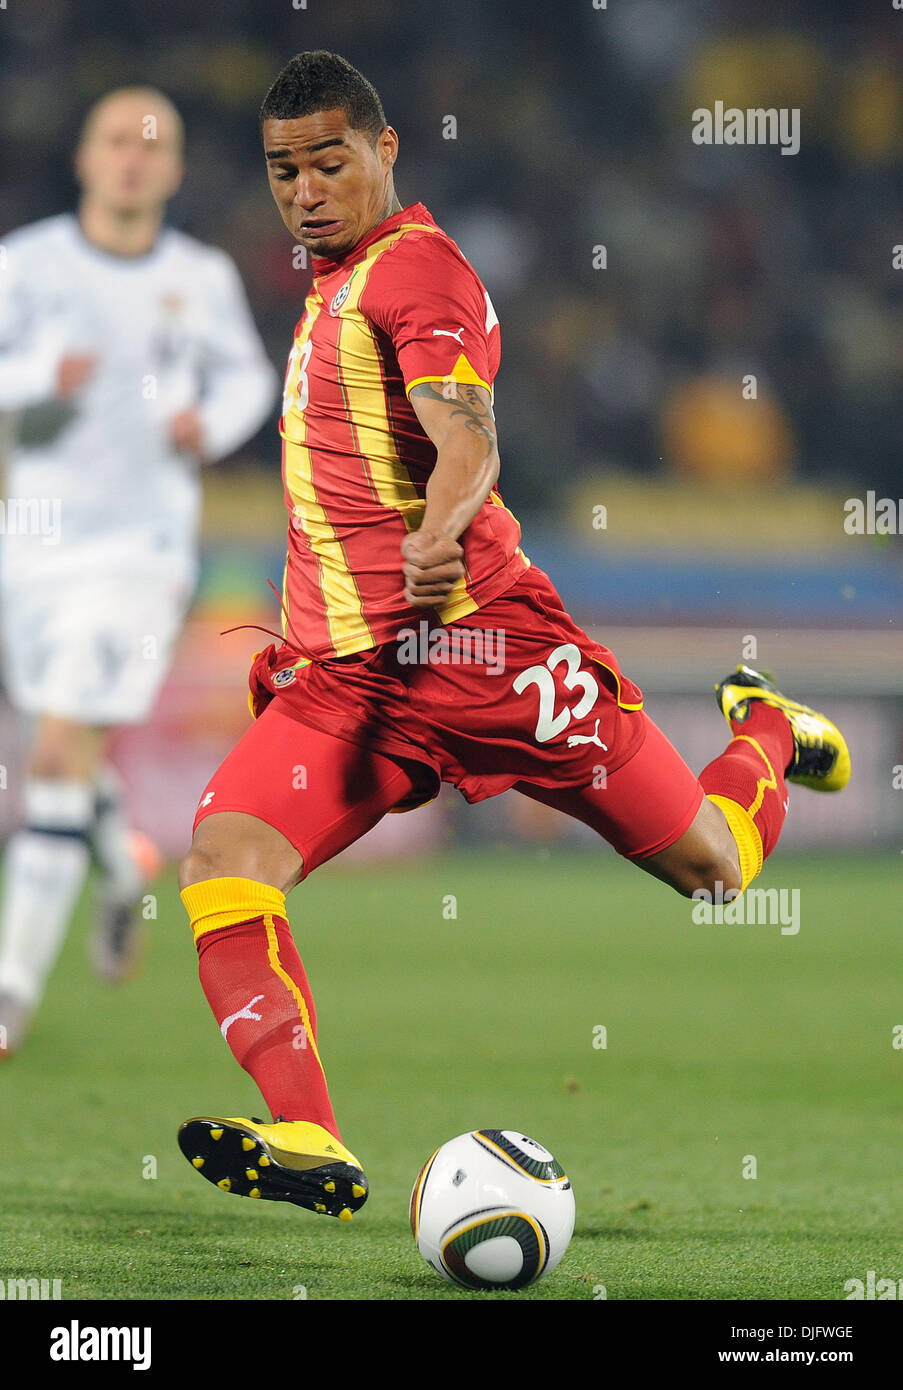 June 26, 2010 - Rustenburg, South Africa - Kevin Prince Boateng of Ghana scores a goal during the 2010 FIFA World Cup soccer match between USA and Ghana at Royal Bafokeng Stadium. (Credit Image: © Luca Ghidoni/ZUMApress.com) Stock Photo